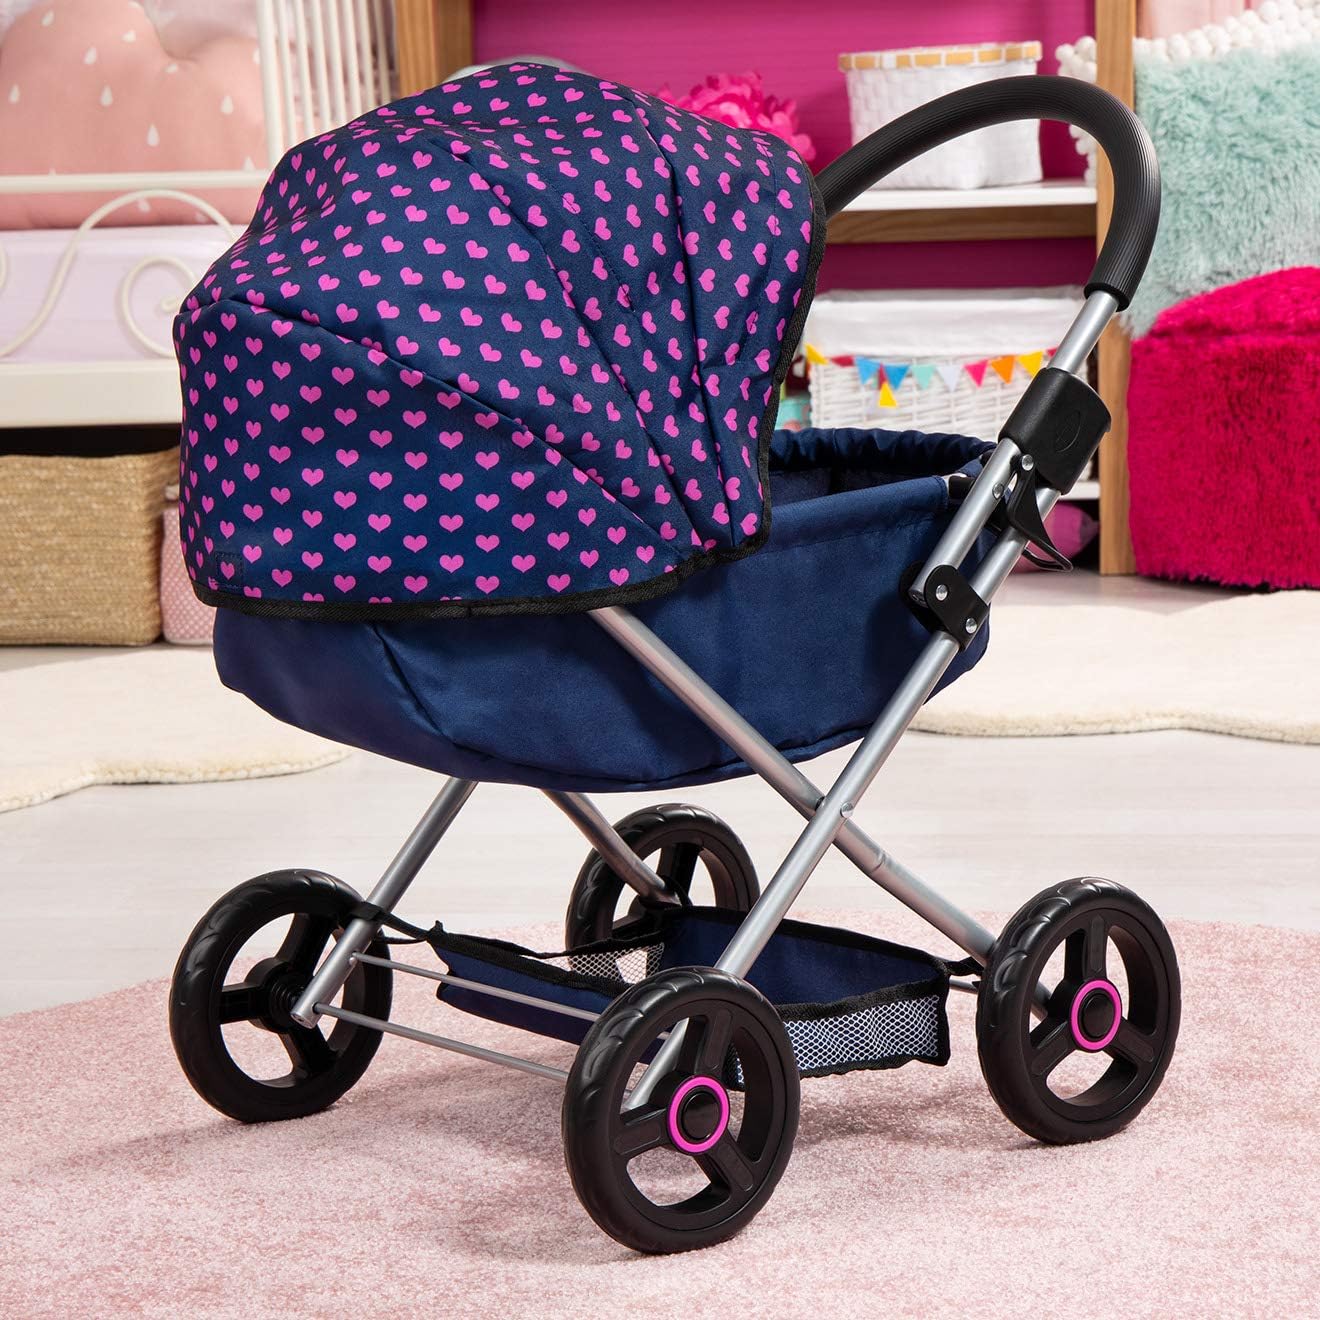 Bayer Dolls 4-in-1 Toy Baby Doll Pram Stroller Cosy Set - Dolls up to 18" (Blue/Purple) - image 10 of 10